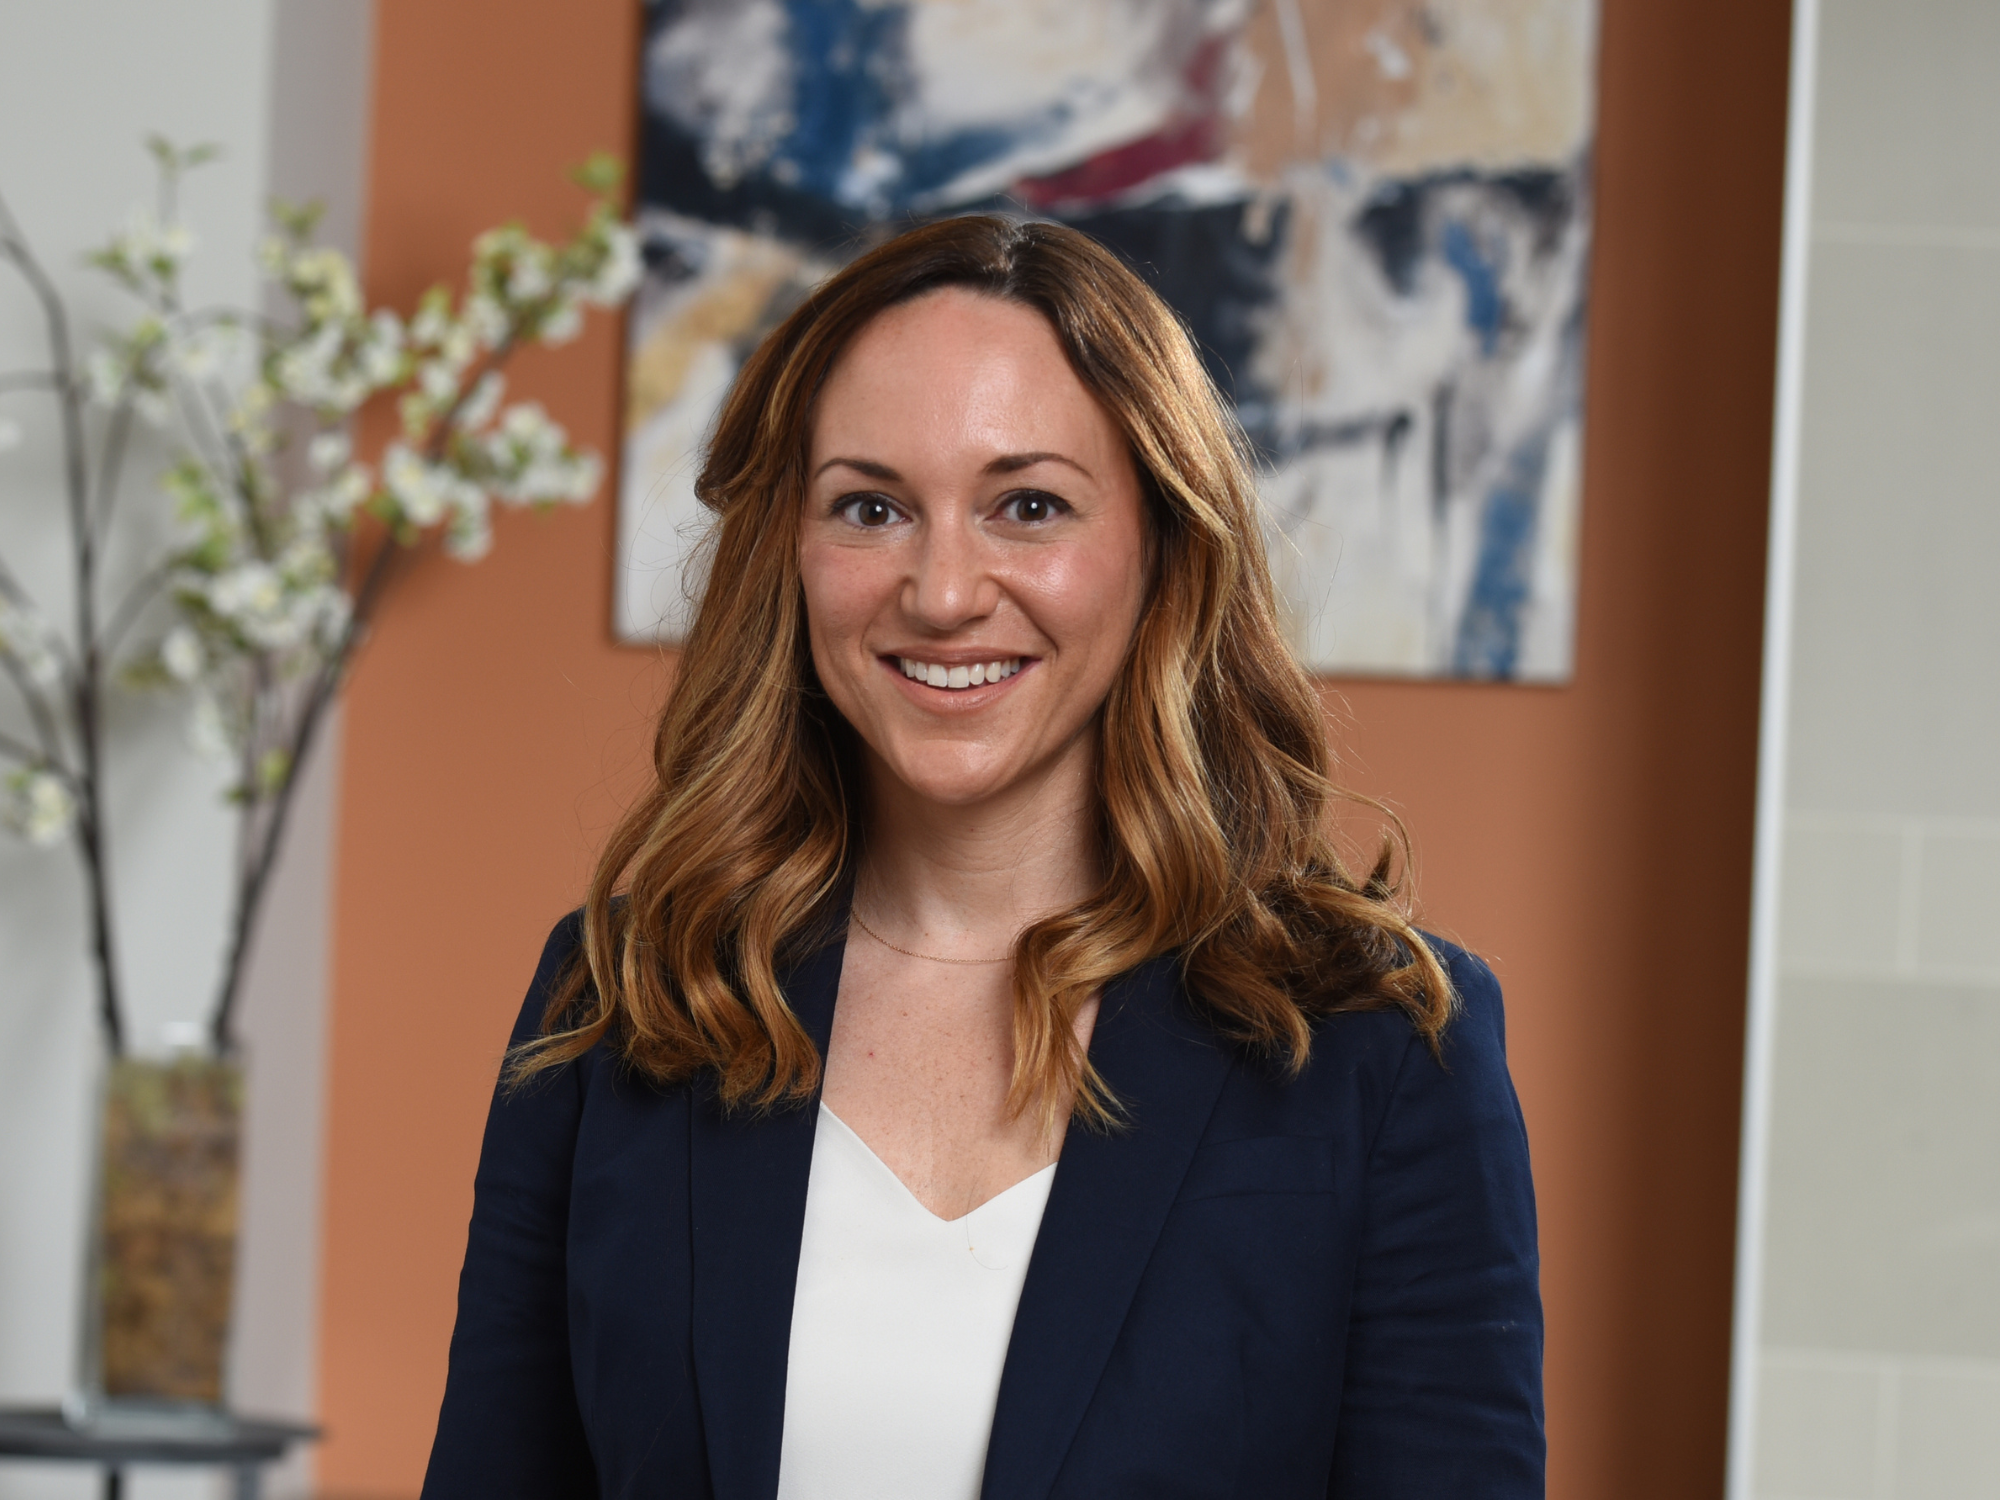 MEET CARLY WARNER, GENERAL MANAGER